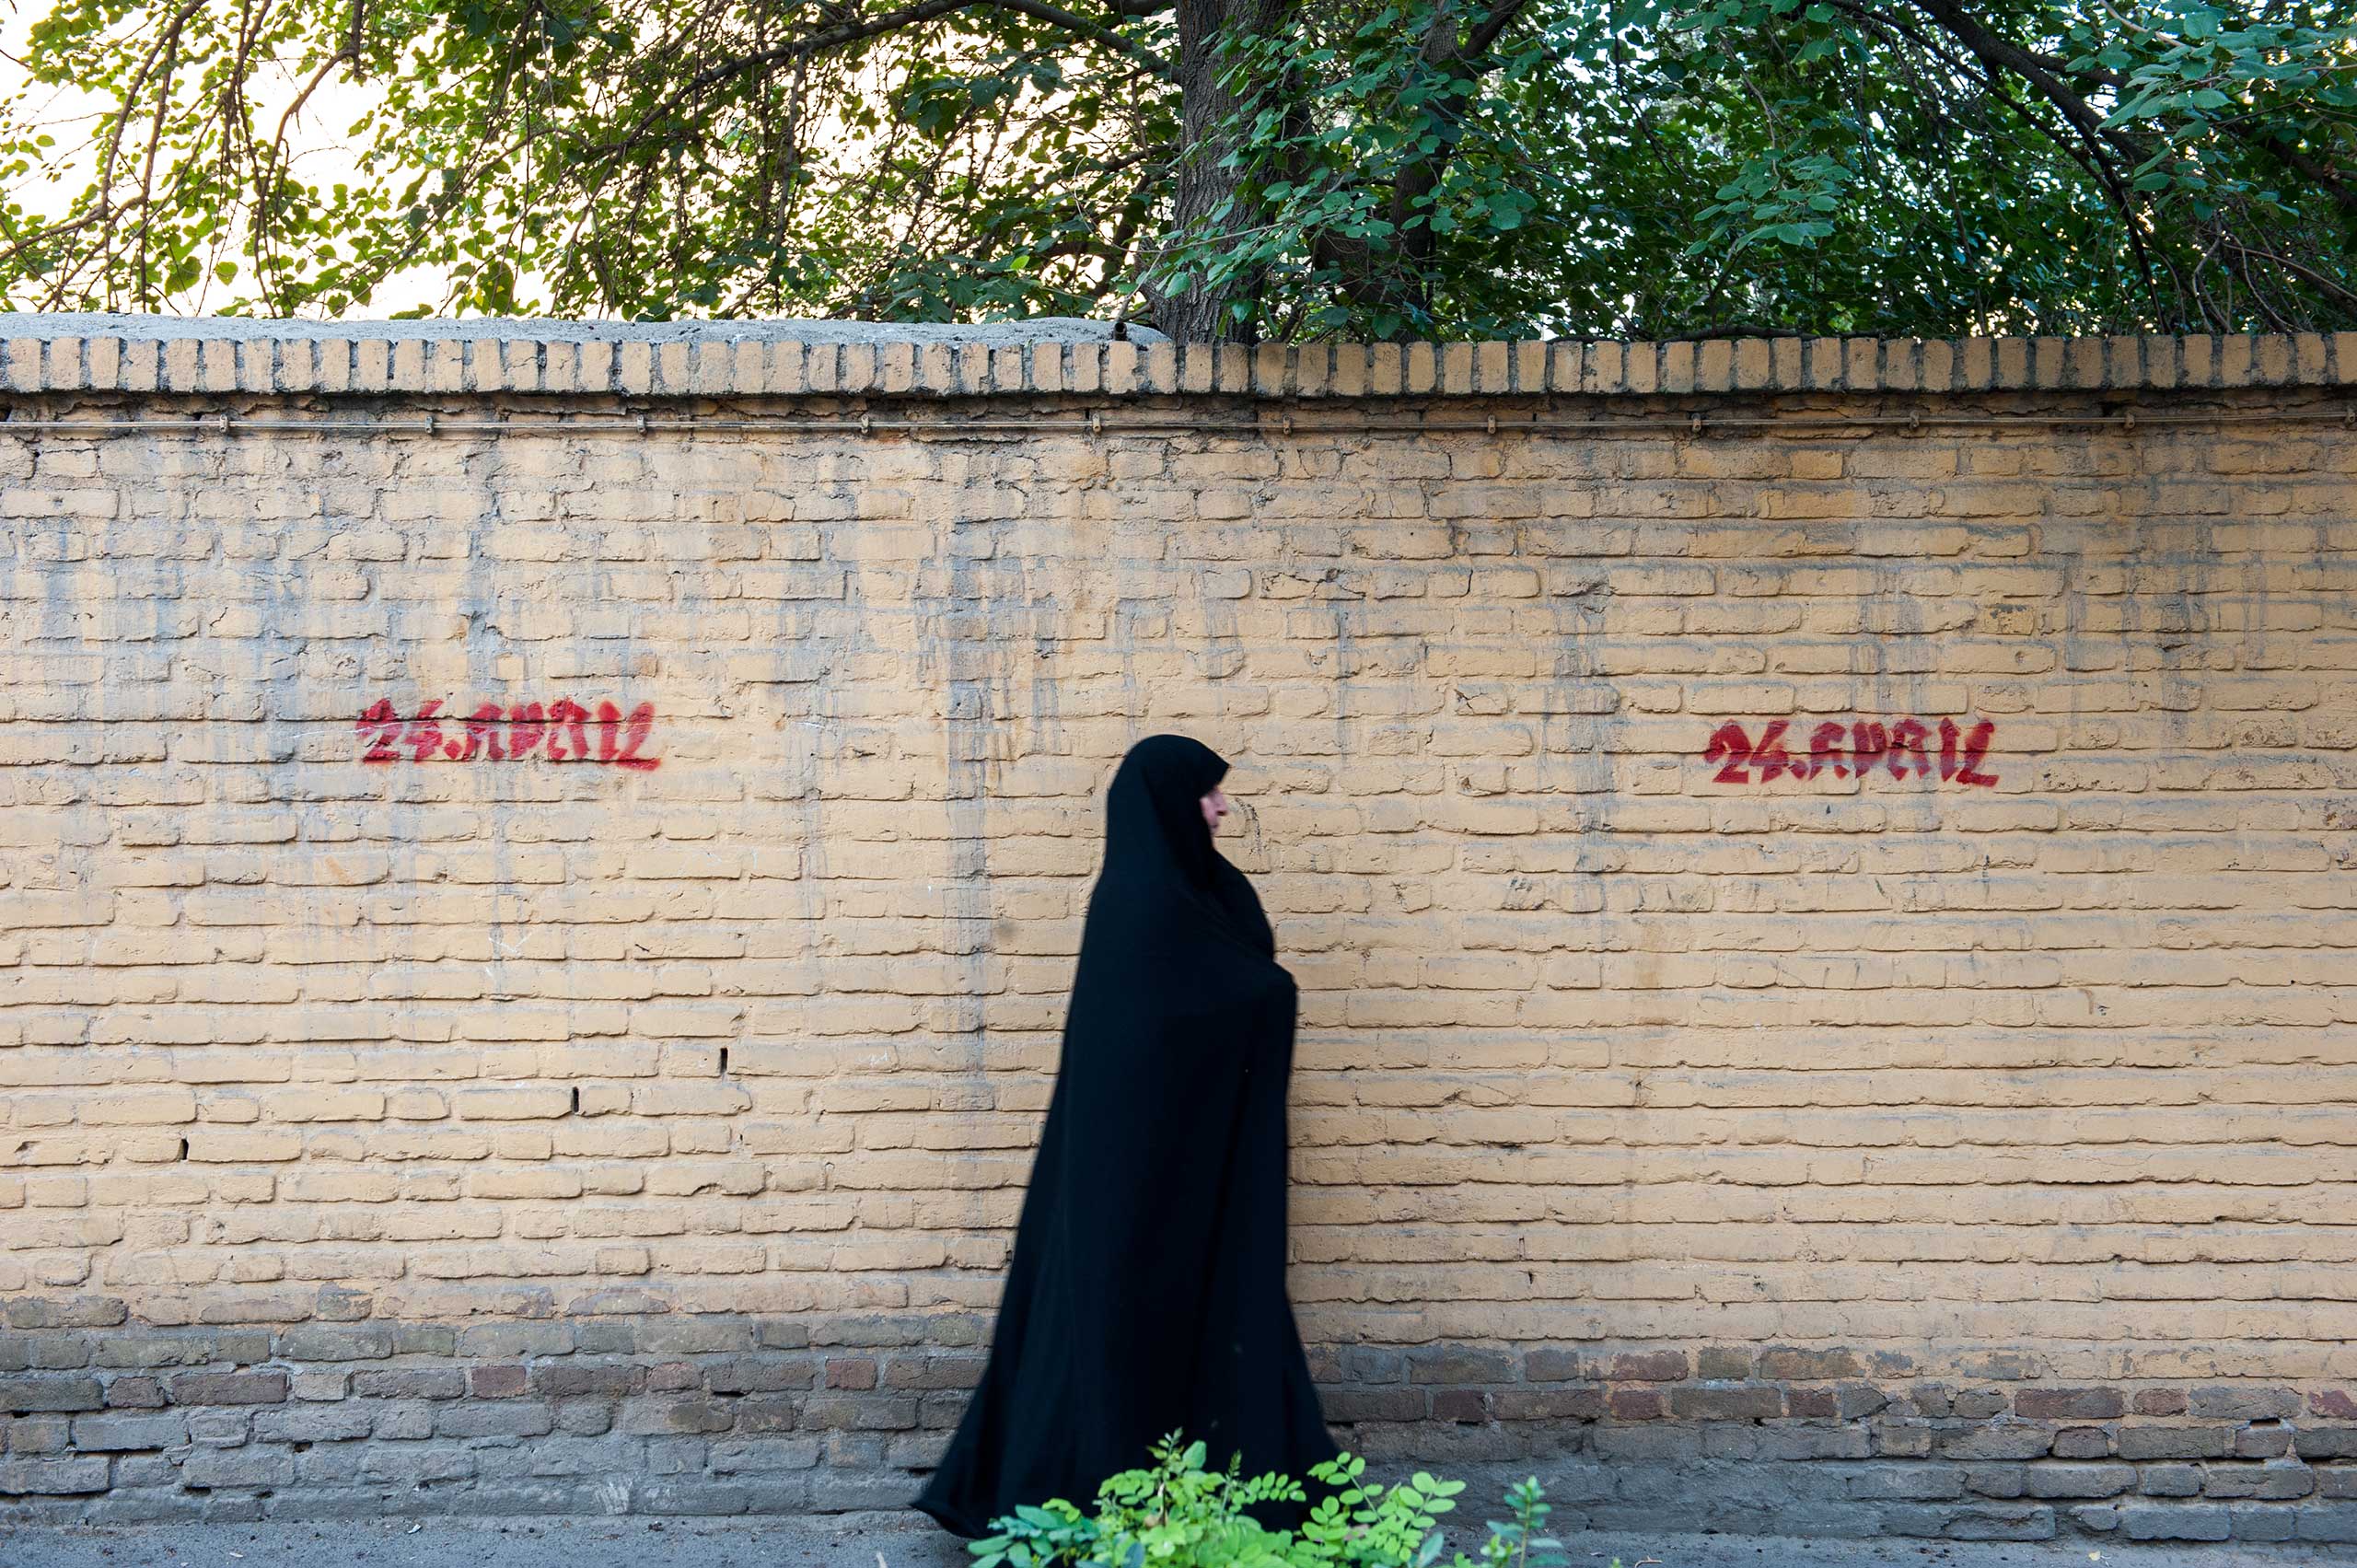 A woman walks by graffiti that reads '24 April 1915' which is date the Armenian genocide began during the Ottoman empire. Such graffiti is common in Armenian neighborhoods.